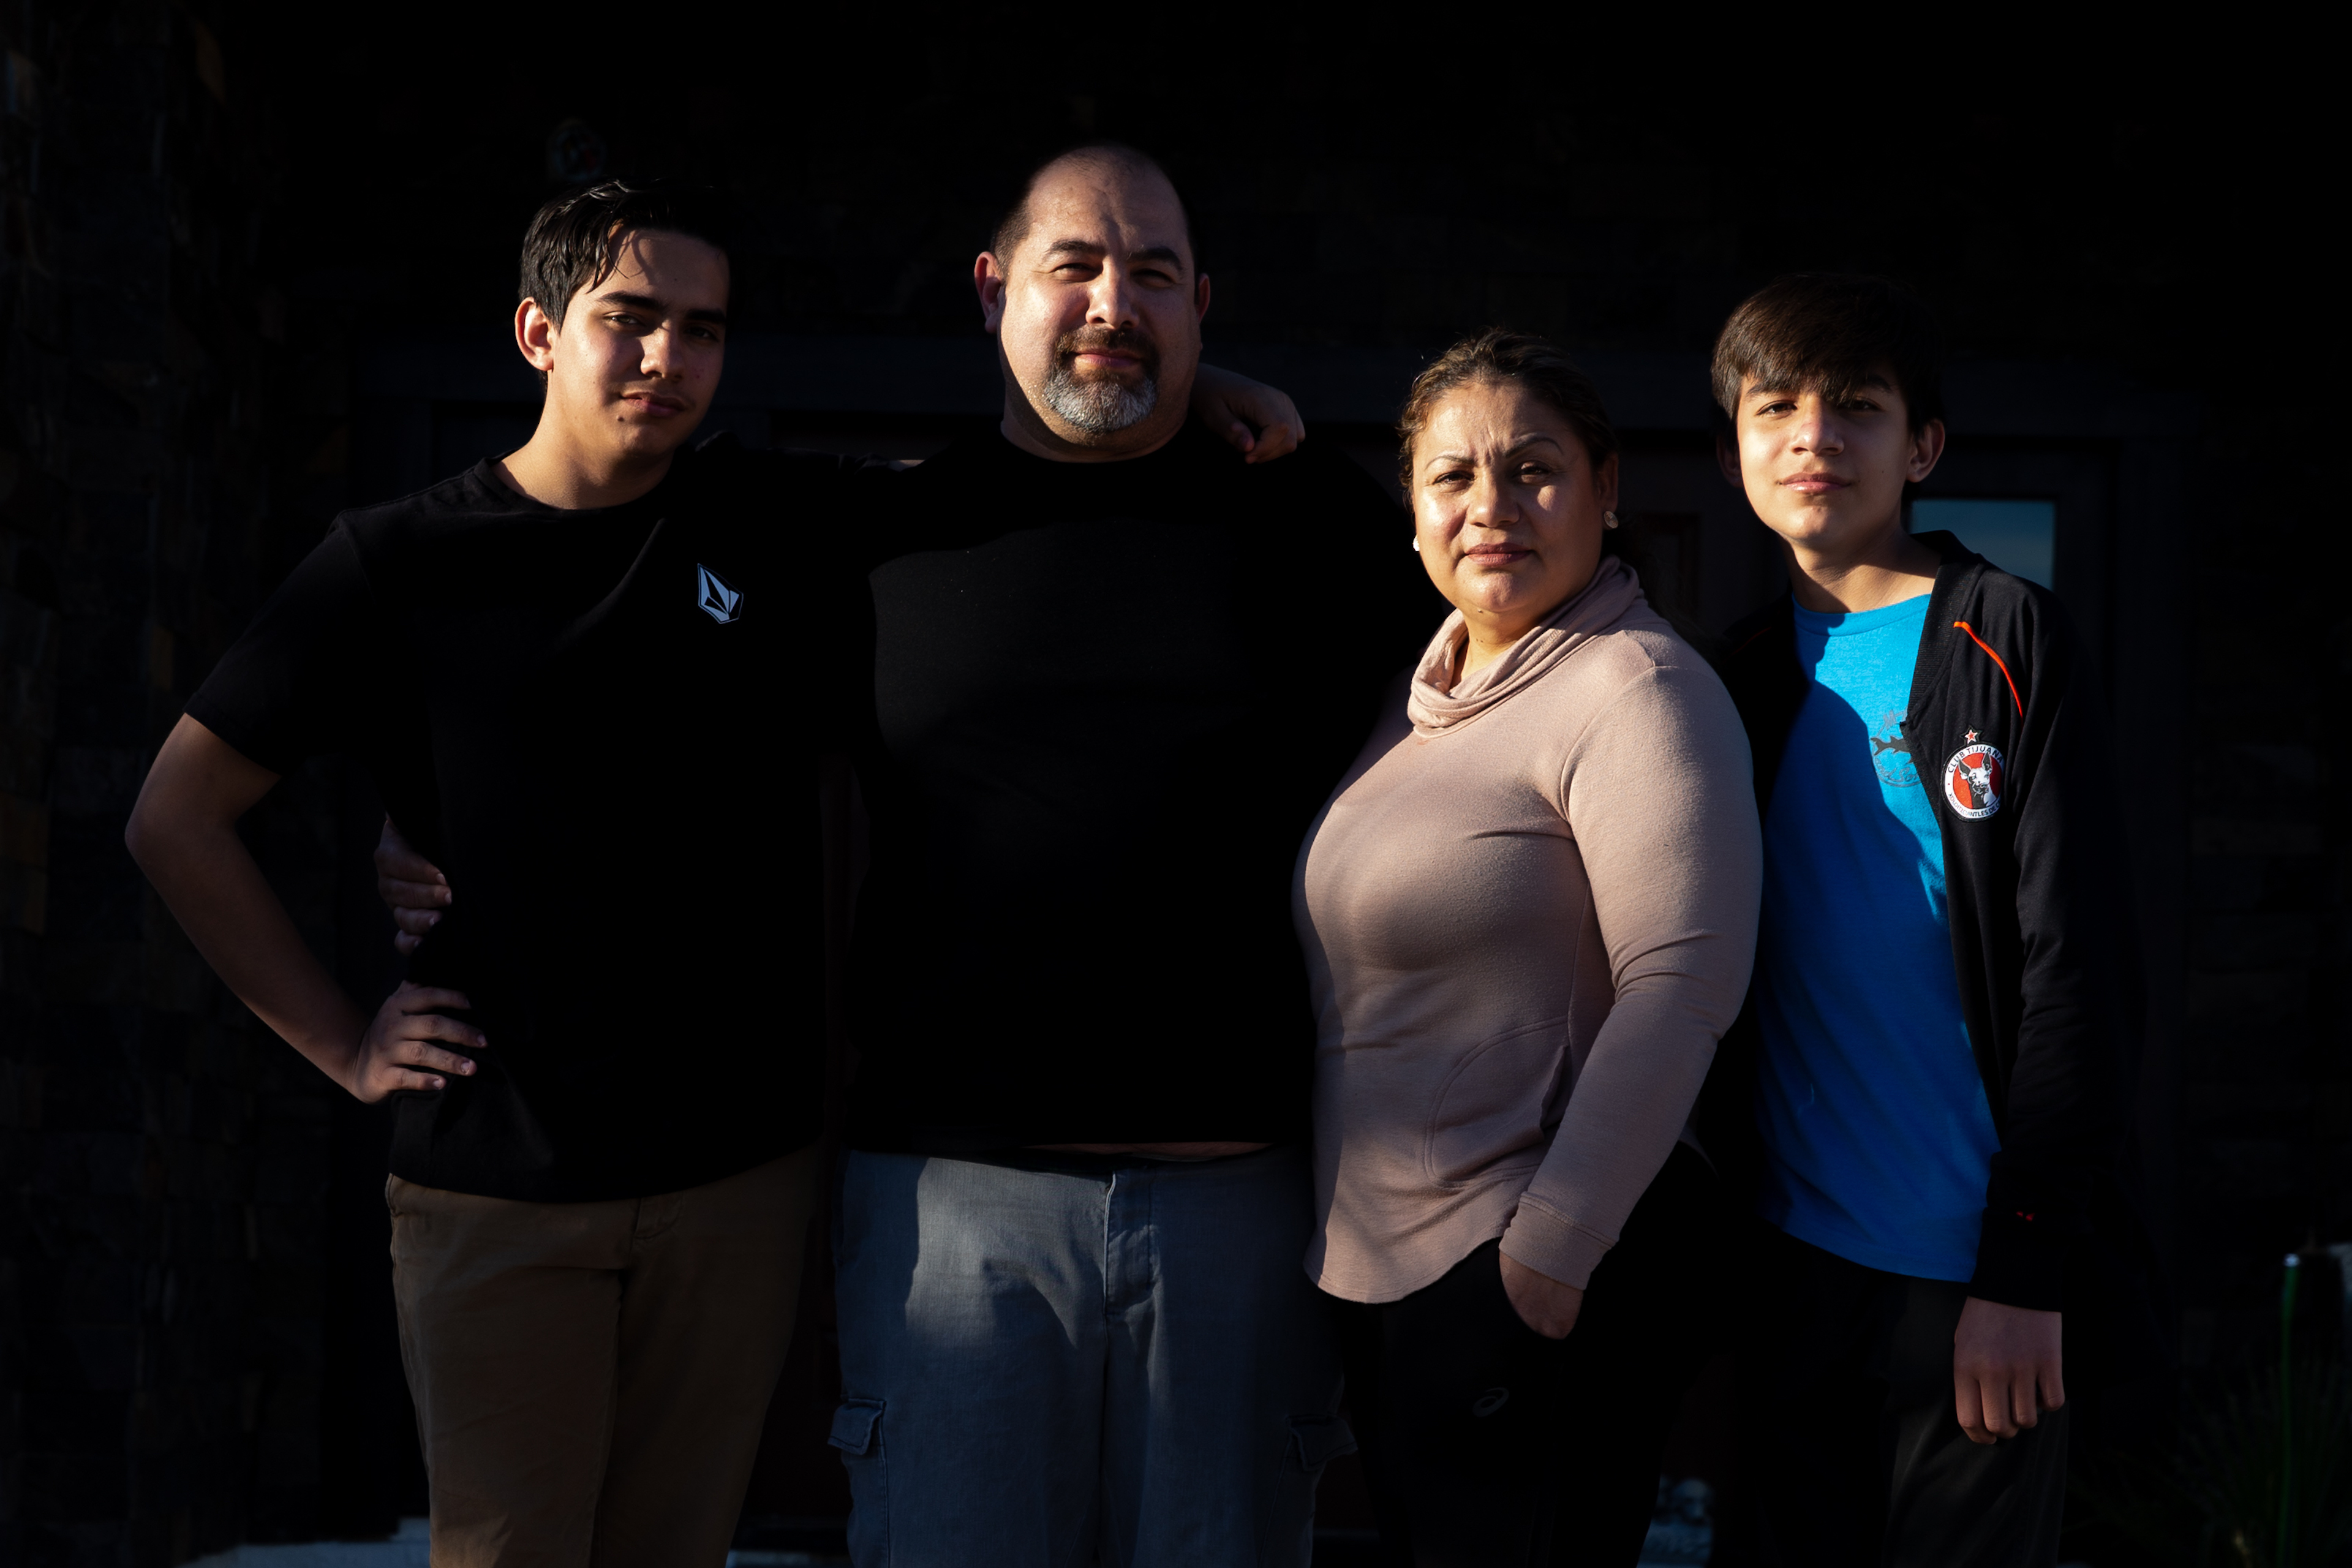 Call It ‘Mexicare’: Fed Up With High Medical Bills, a Family Crosses the Border for Health Care